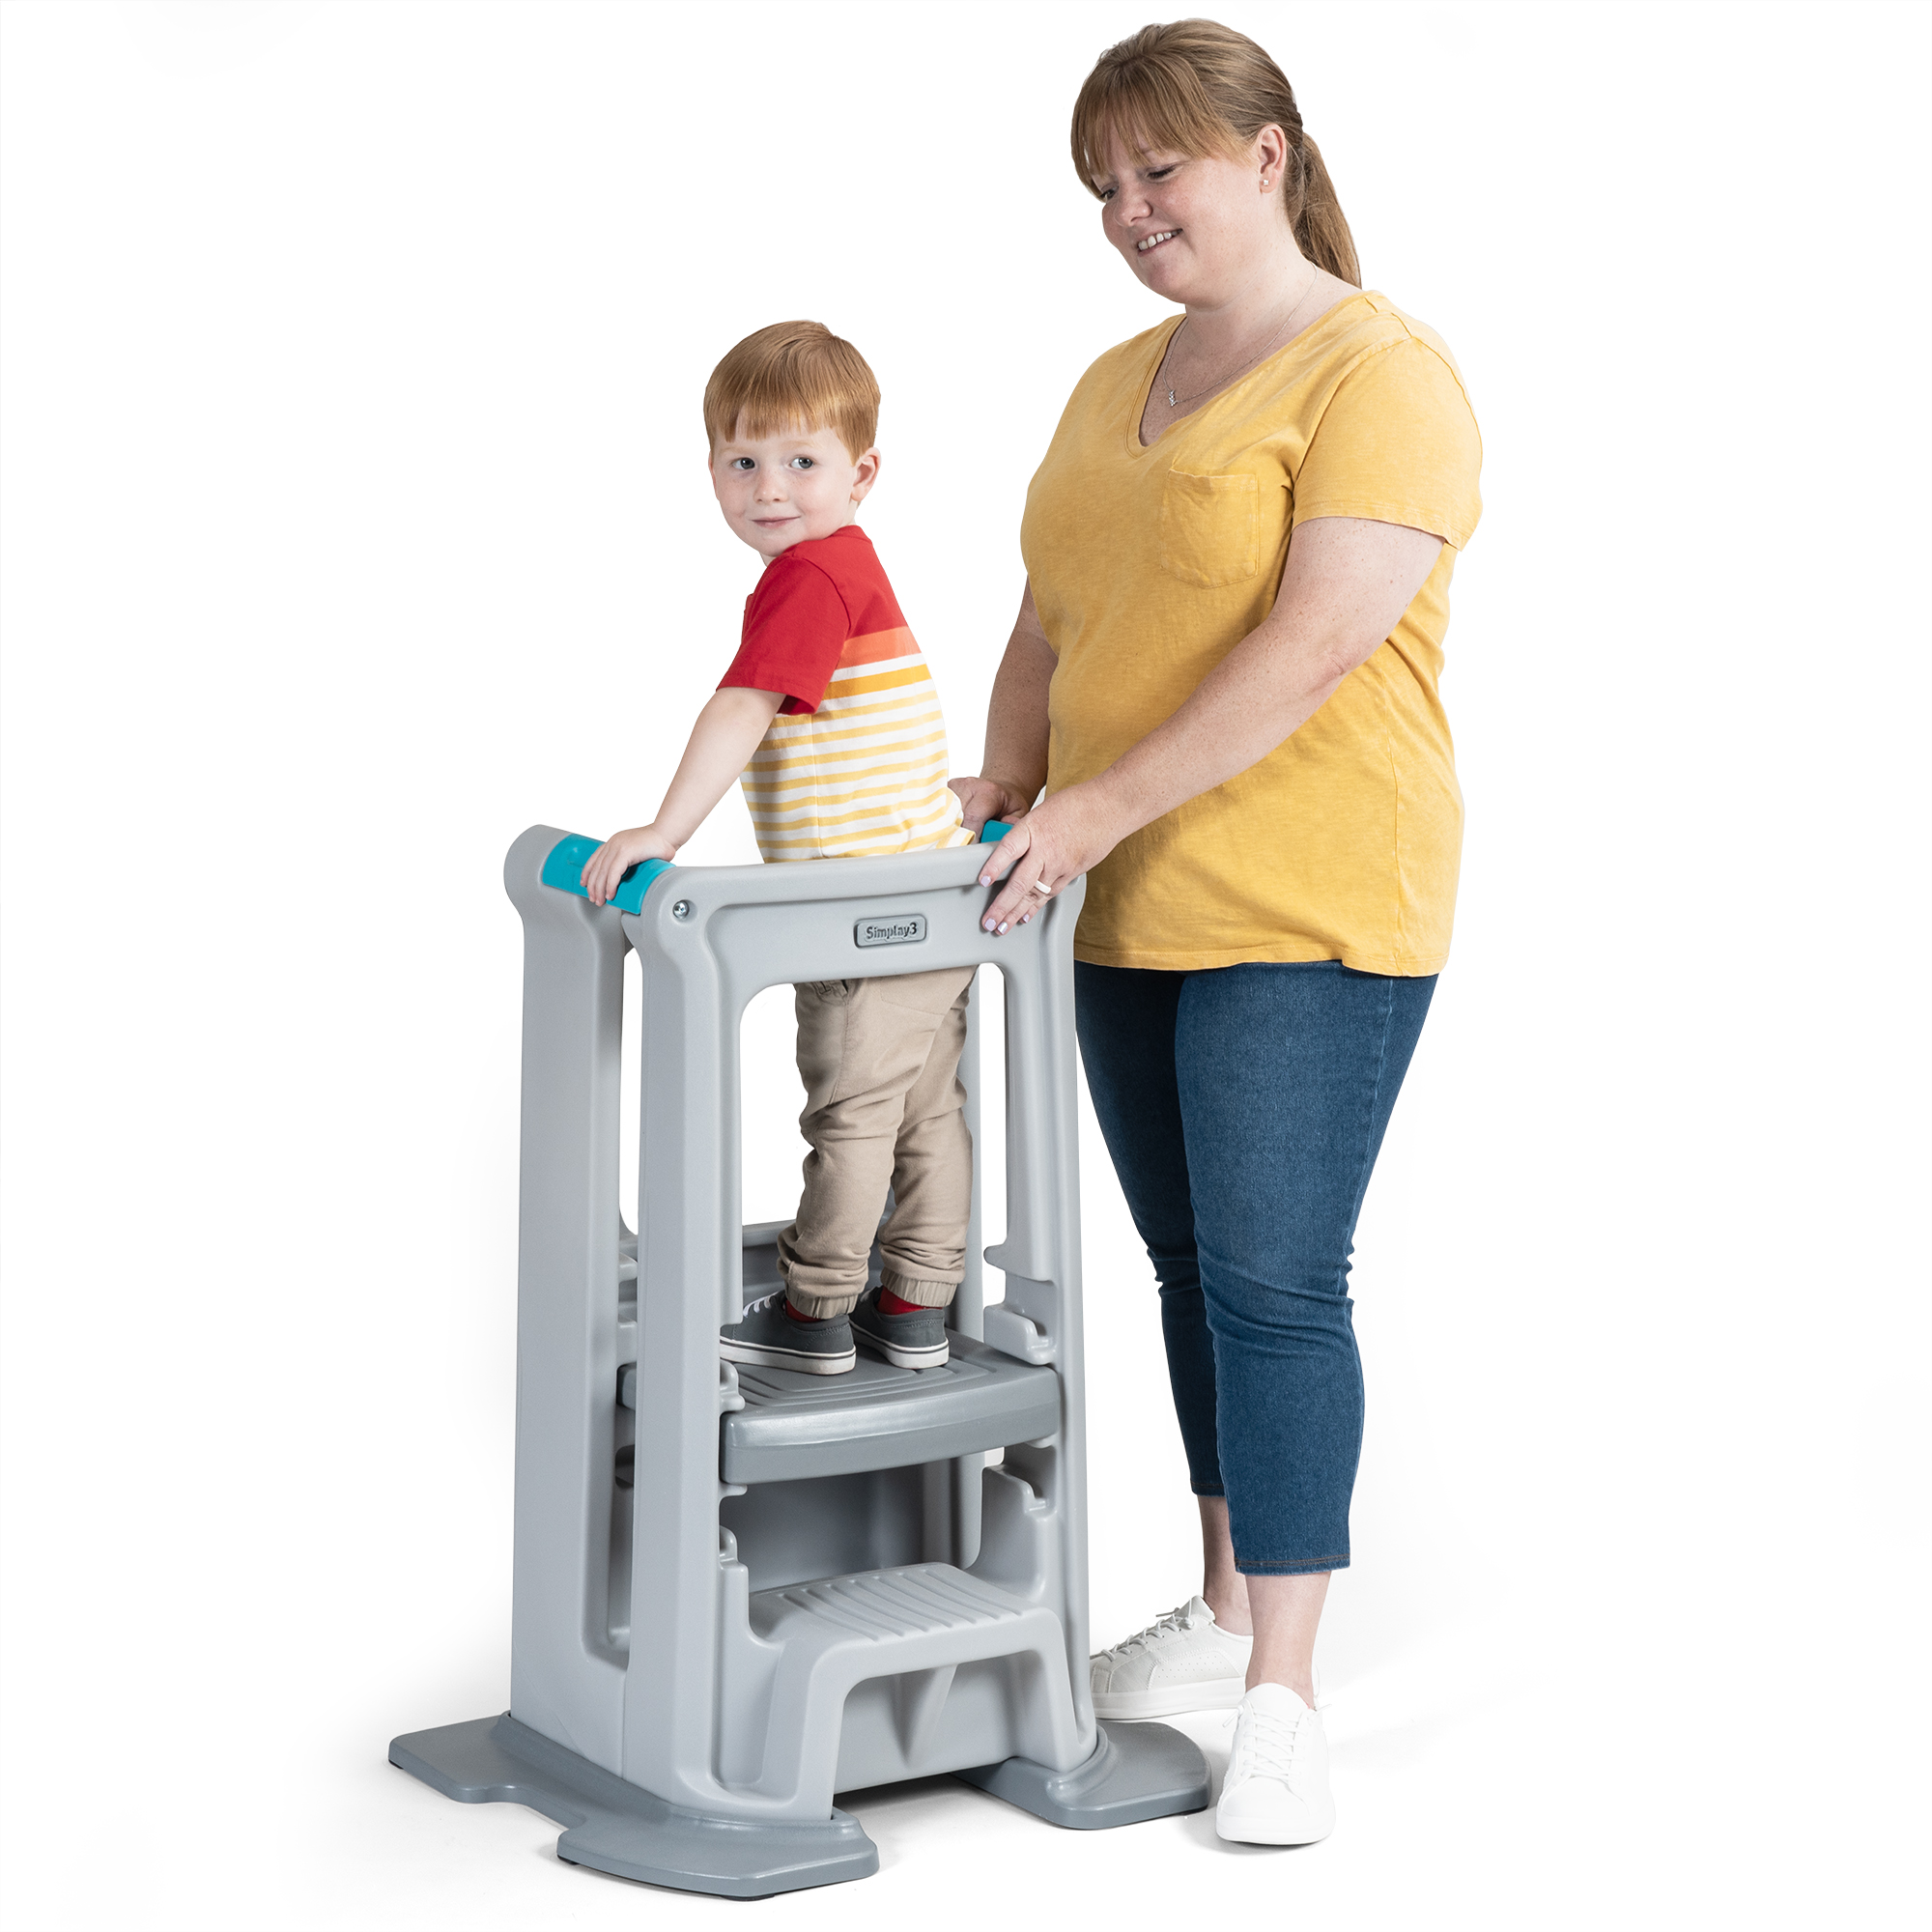 Toddler Tower kitchen helper stool for kids by simplay3